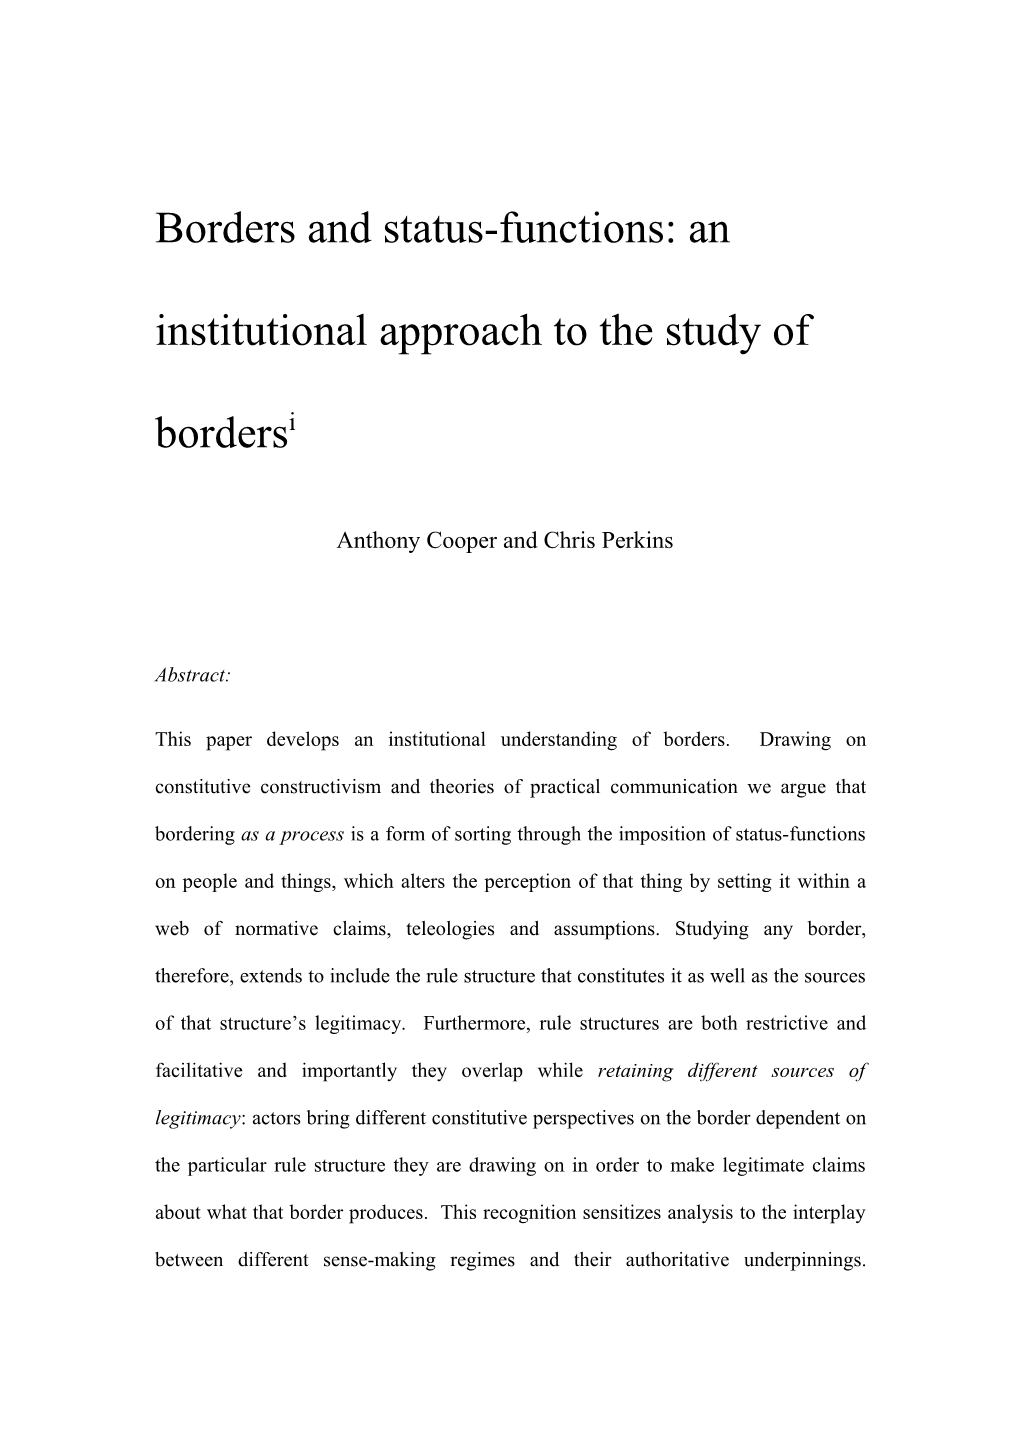 Borders and Status-Functions: an Institutional Approach to the Study of Borders I